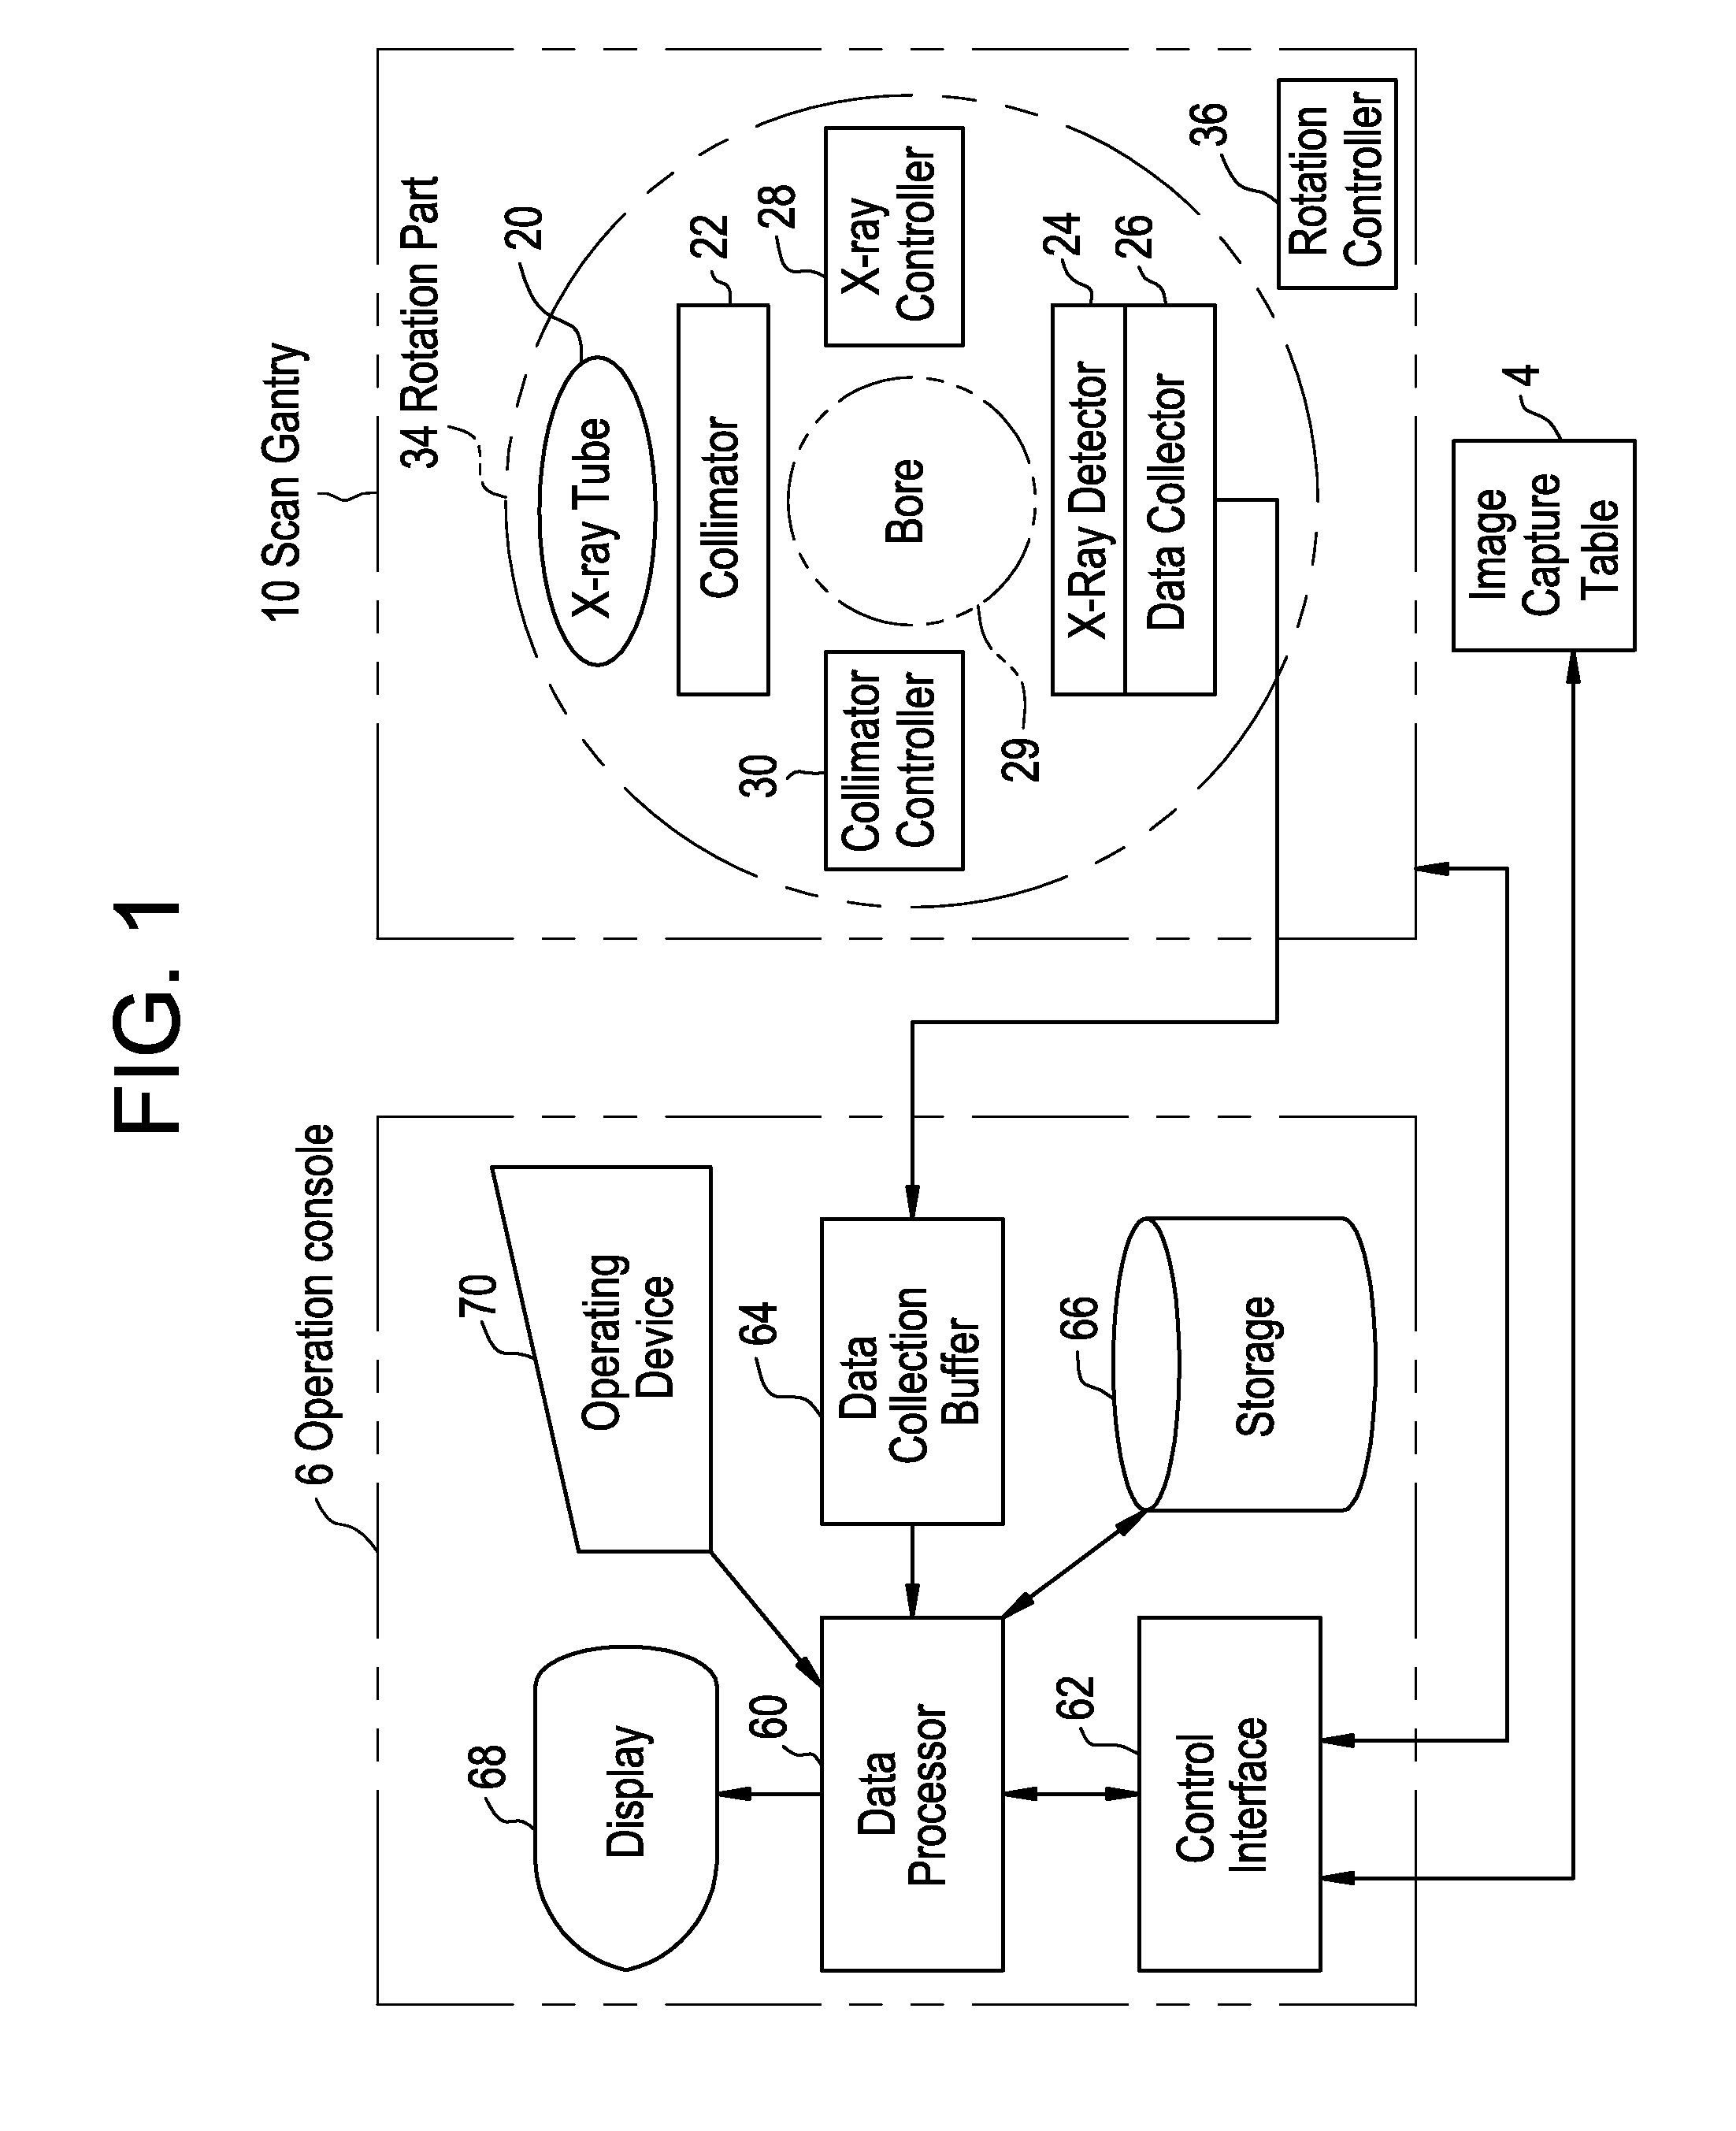 X-ray detector and x-ray ct apparatus